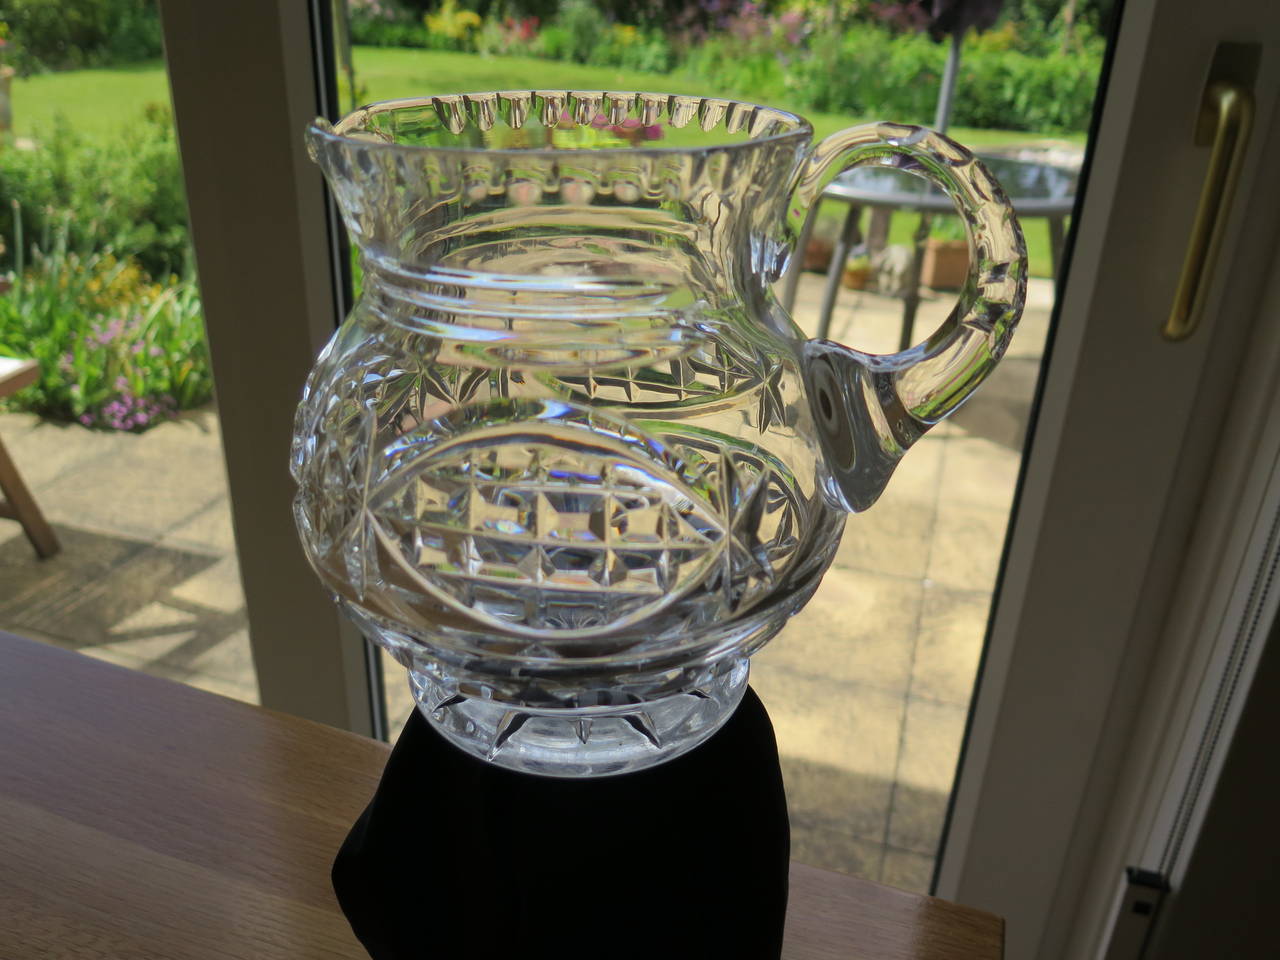 This is a high quality lead glass, hand blown, water jug or pitcher which we date to the William IV period, circa 1835

This jug is heavy (about 1.3 kg) and holds over 2 pints.

The jug is globular in shape with a footed base. The shape has been